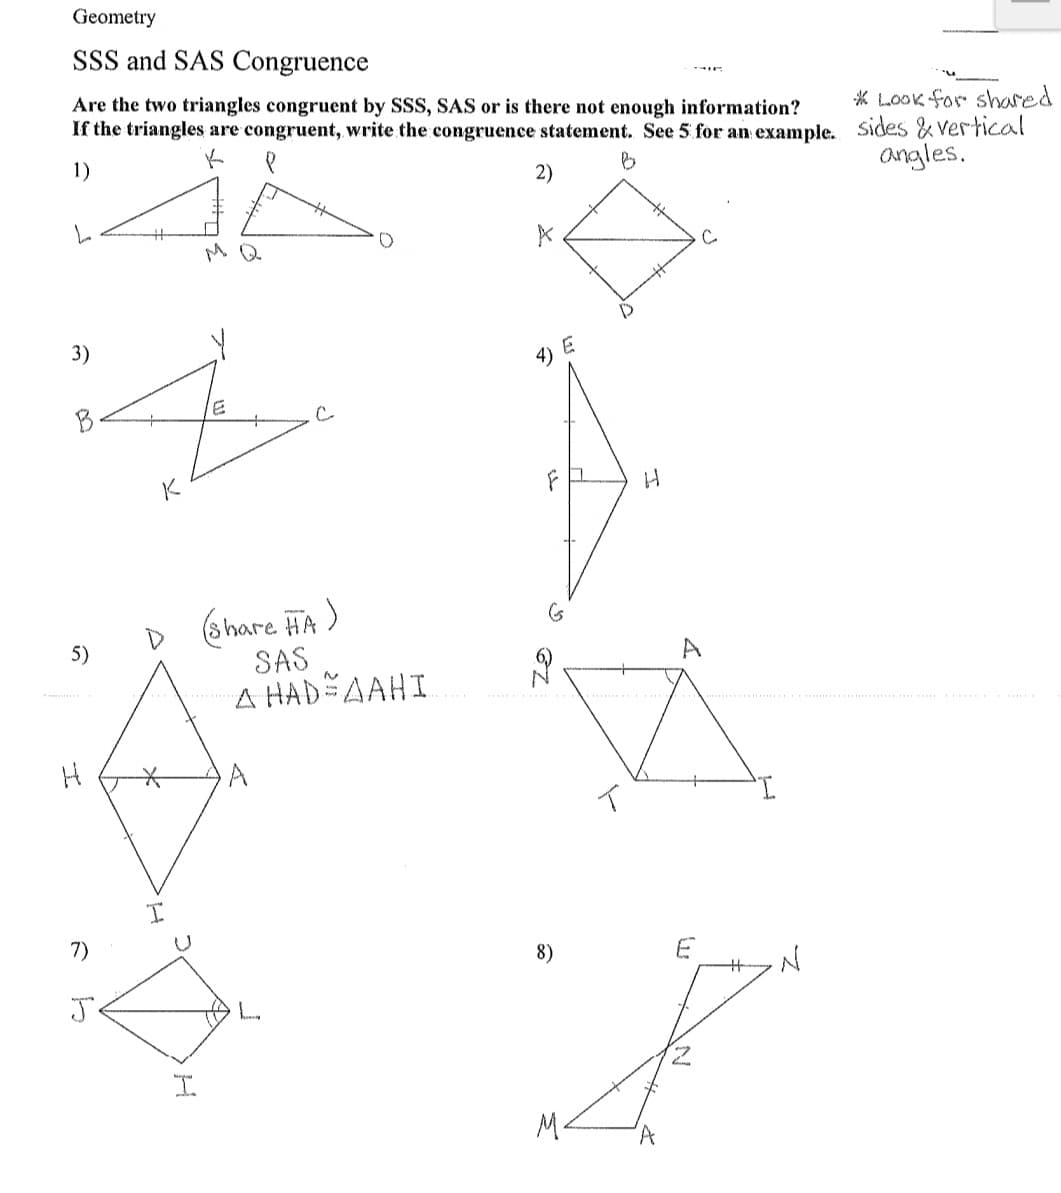 Geometry
SSS and SAS Congruence
Are the two triangles congruent by SSS, SAS or is there not enough information?
If the triangles are congruent, write the congruence statement. See 5 for an example. Sides & Vertical
* Look for shared
1)
2)
angles.
MQ
3)
4) E
B
K
D share HA)
SAS
A HAD AAHI
5)
A
I.
7)
8)
L.
M.
